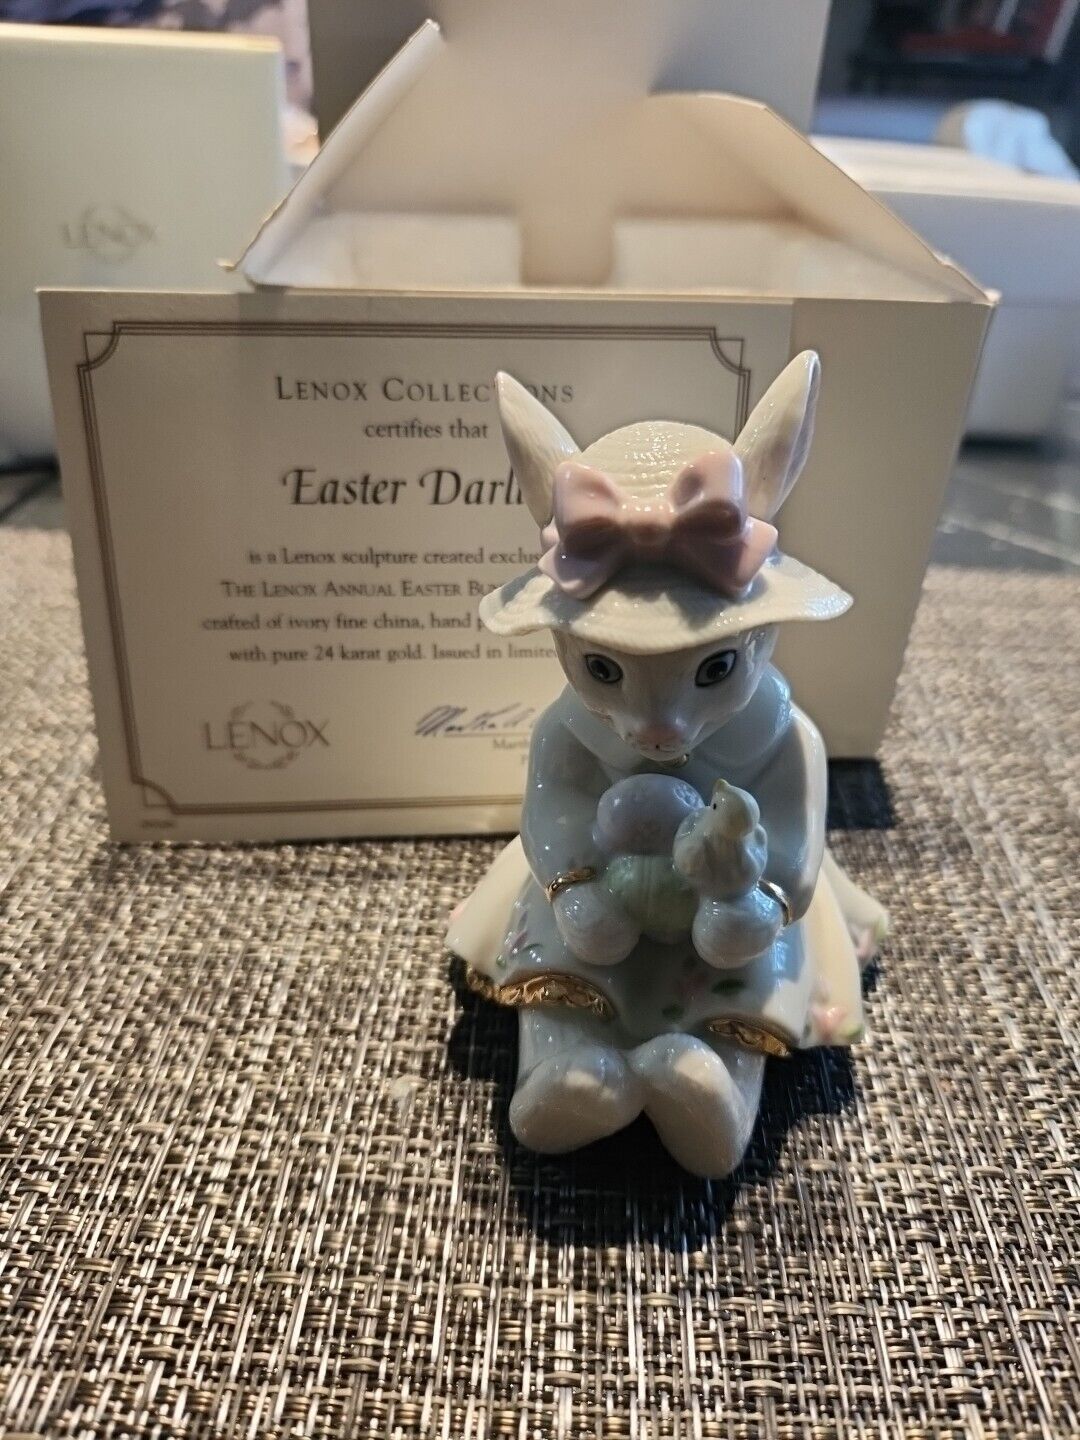 EUC Lenox Easter Bunny Easter Darling with Box and Certificate of Authenticity